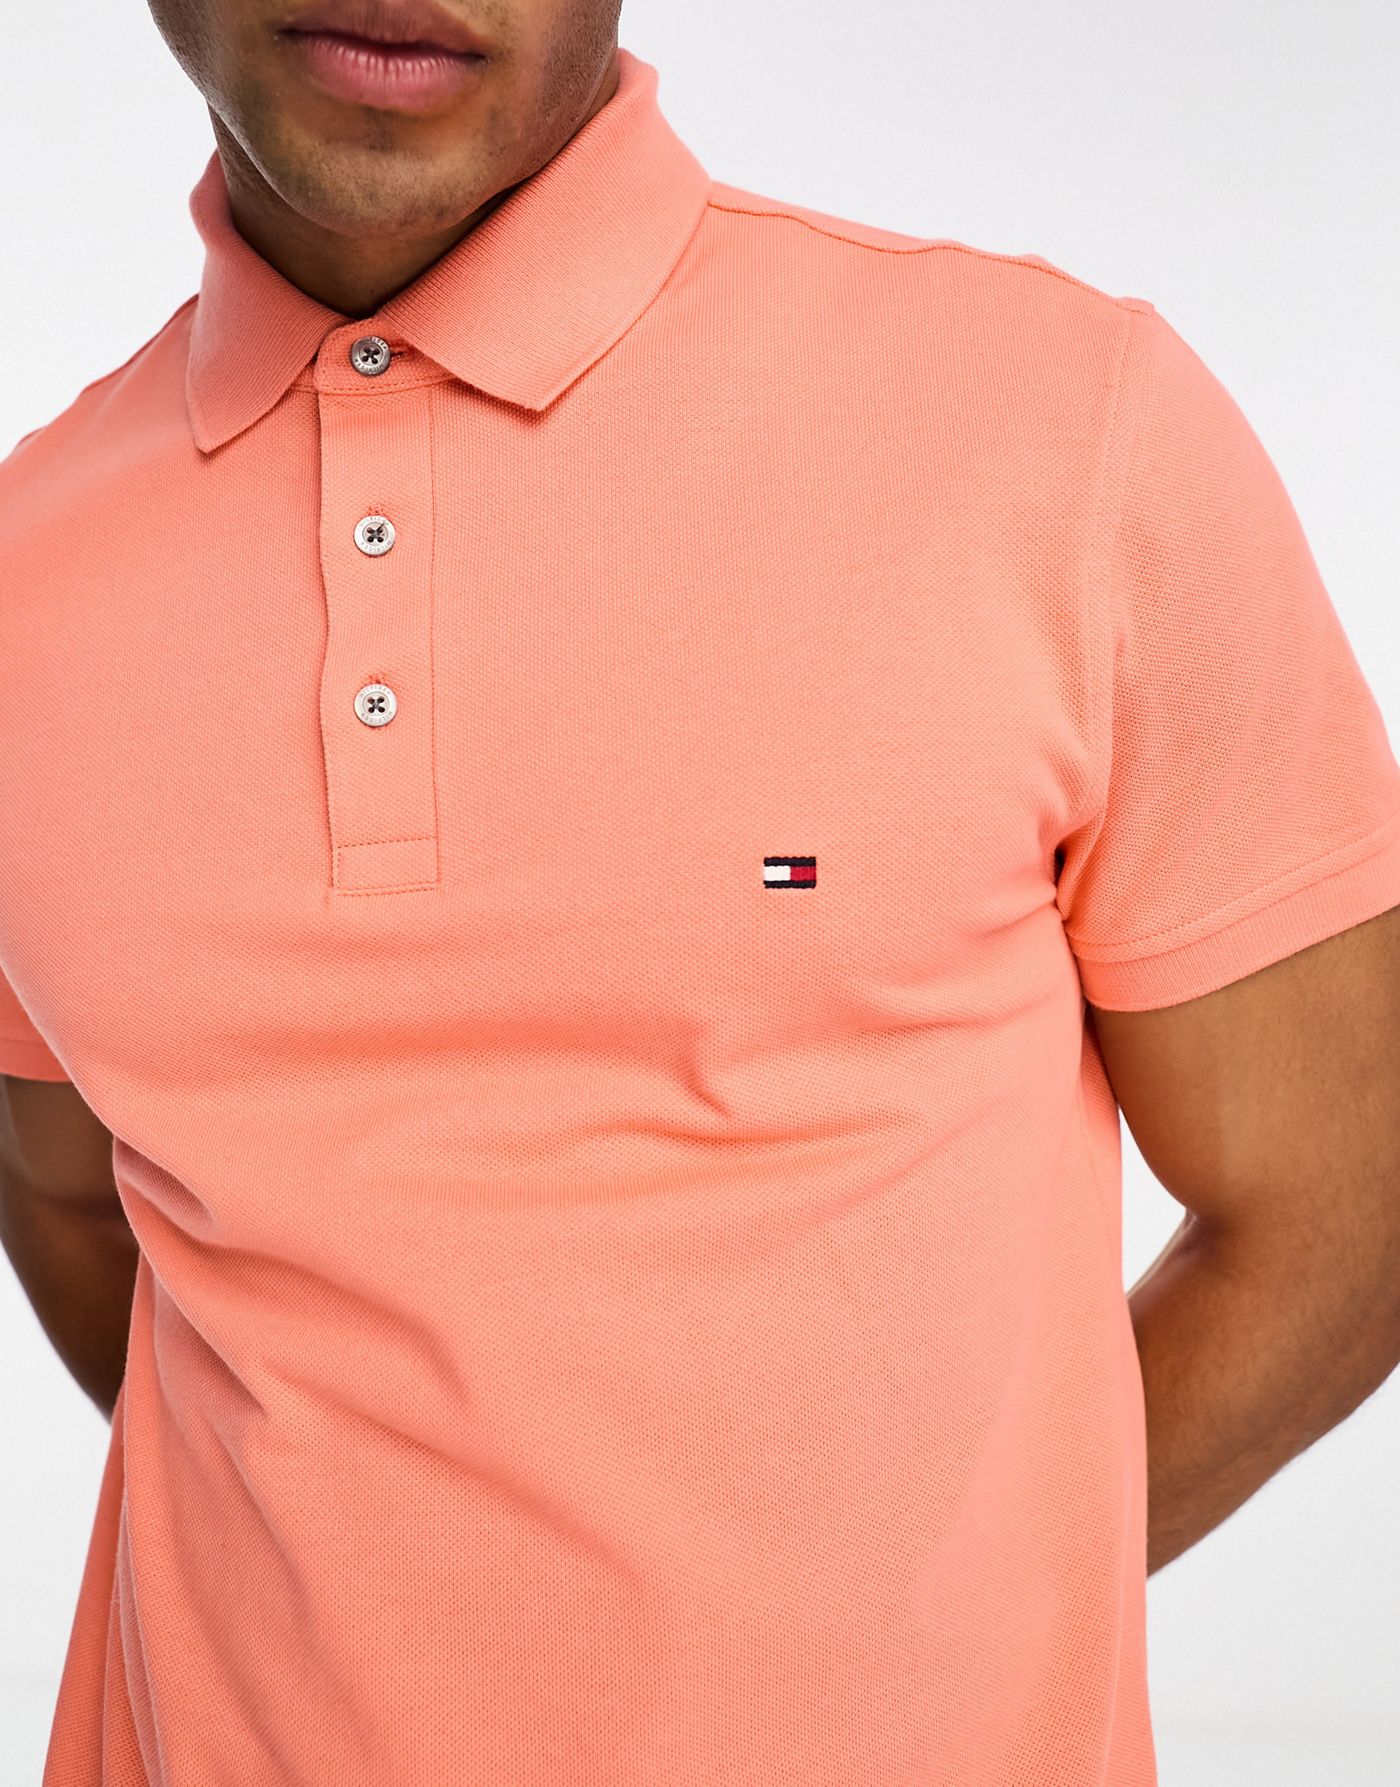 Tommy Hilfiger 1985 slim fit polo top in apricot 